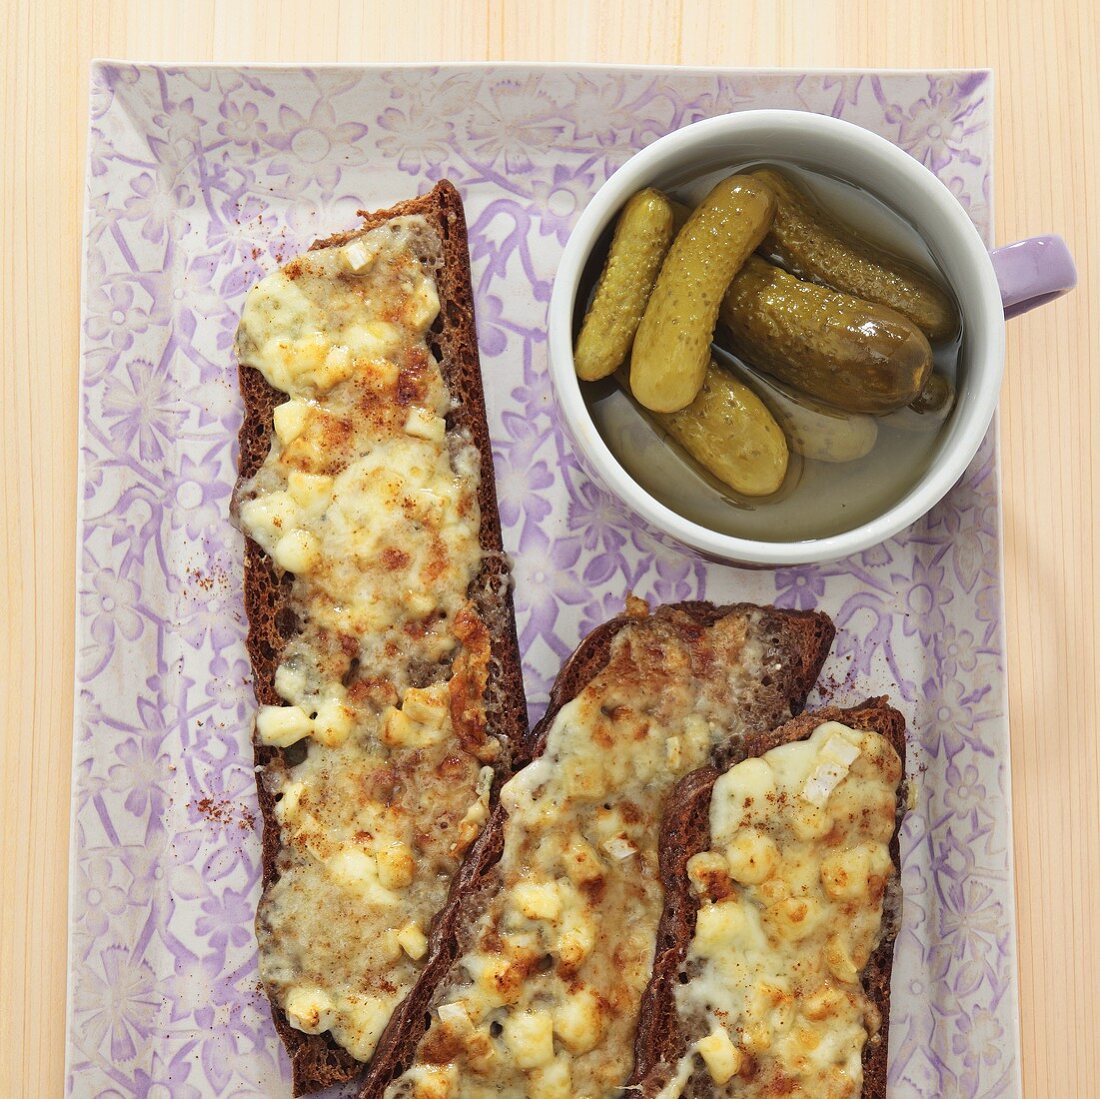 Toasted slices of bread with melted cheese and gherkins